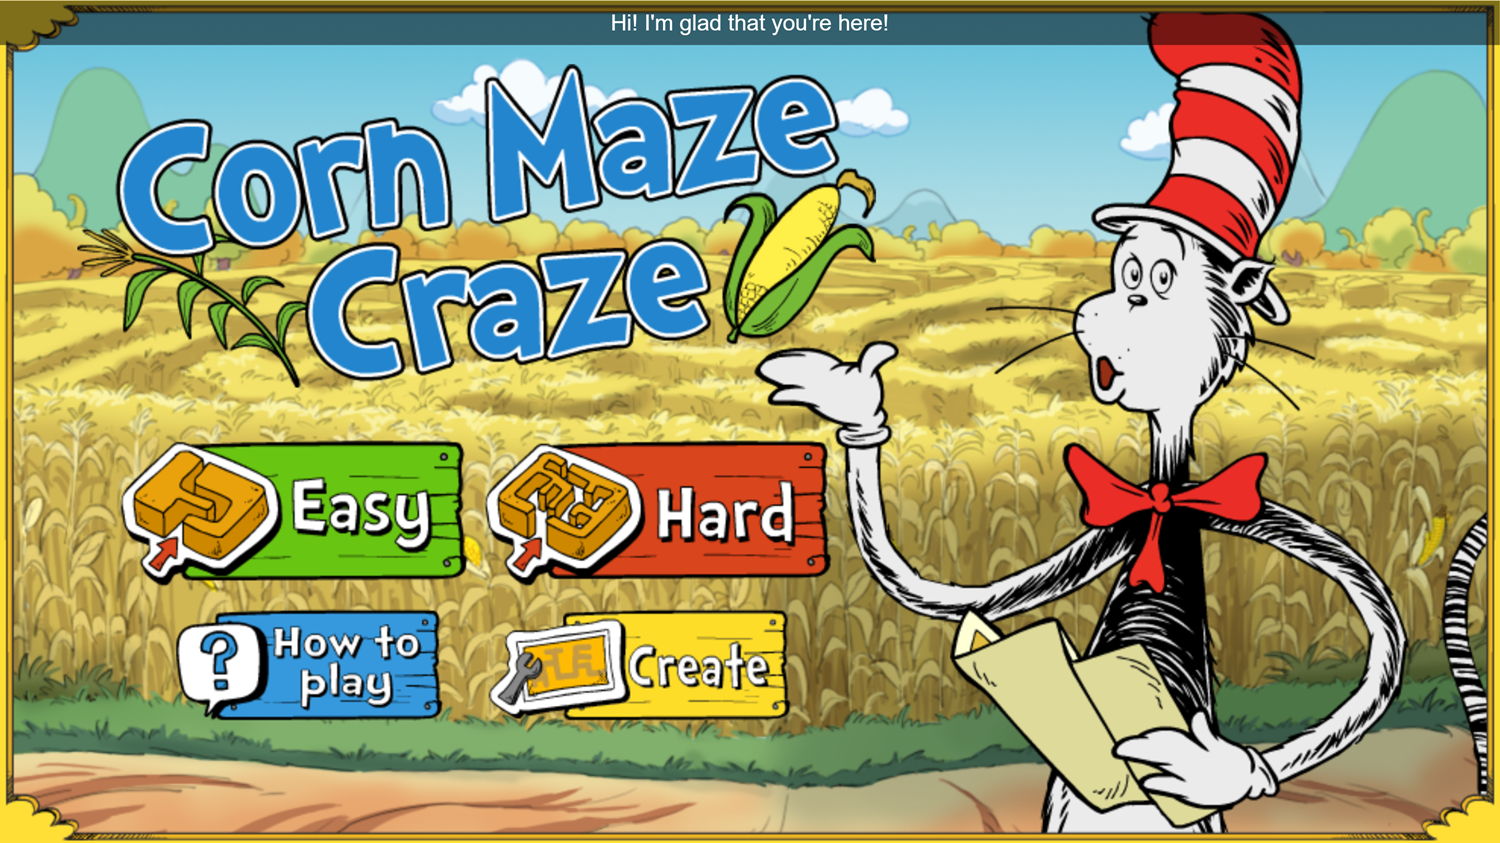 The Cat in the Hat Corn Maze Craze Game Hard Mode Enabled Screenshot.